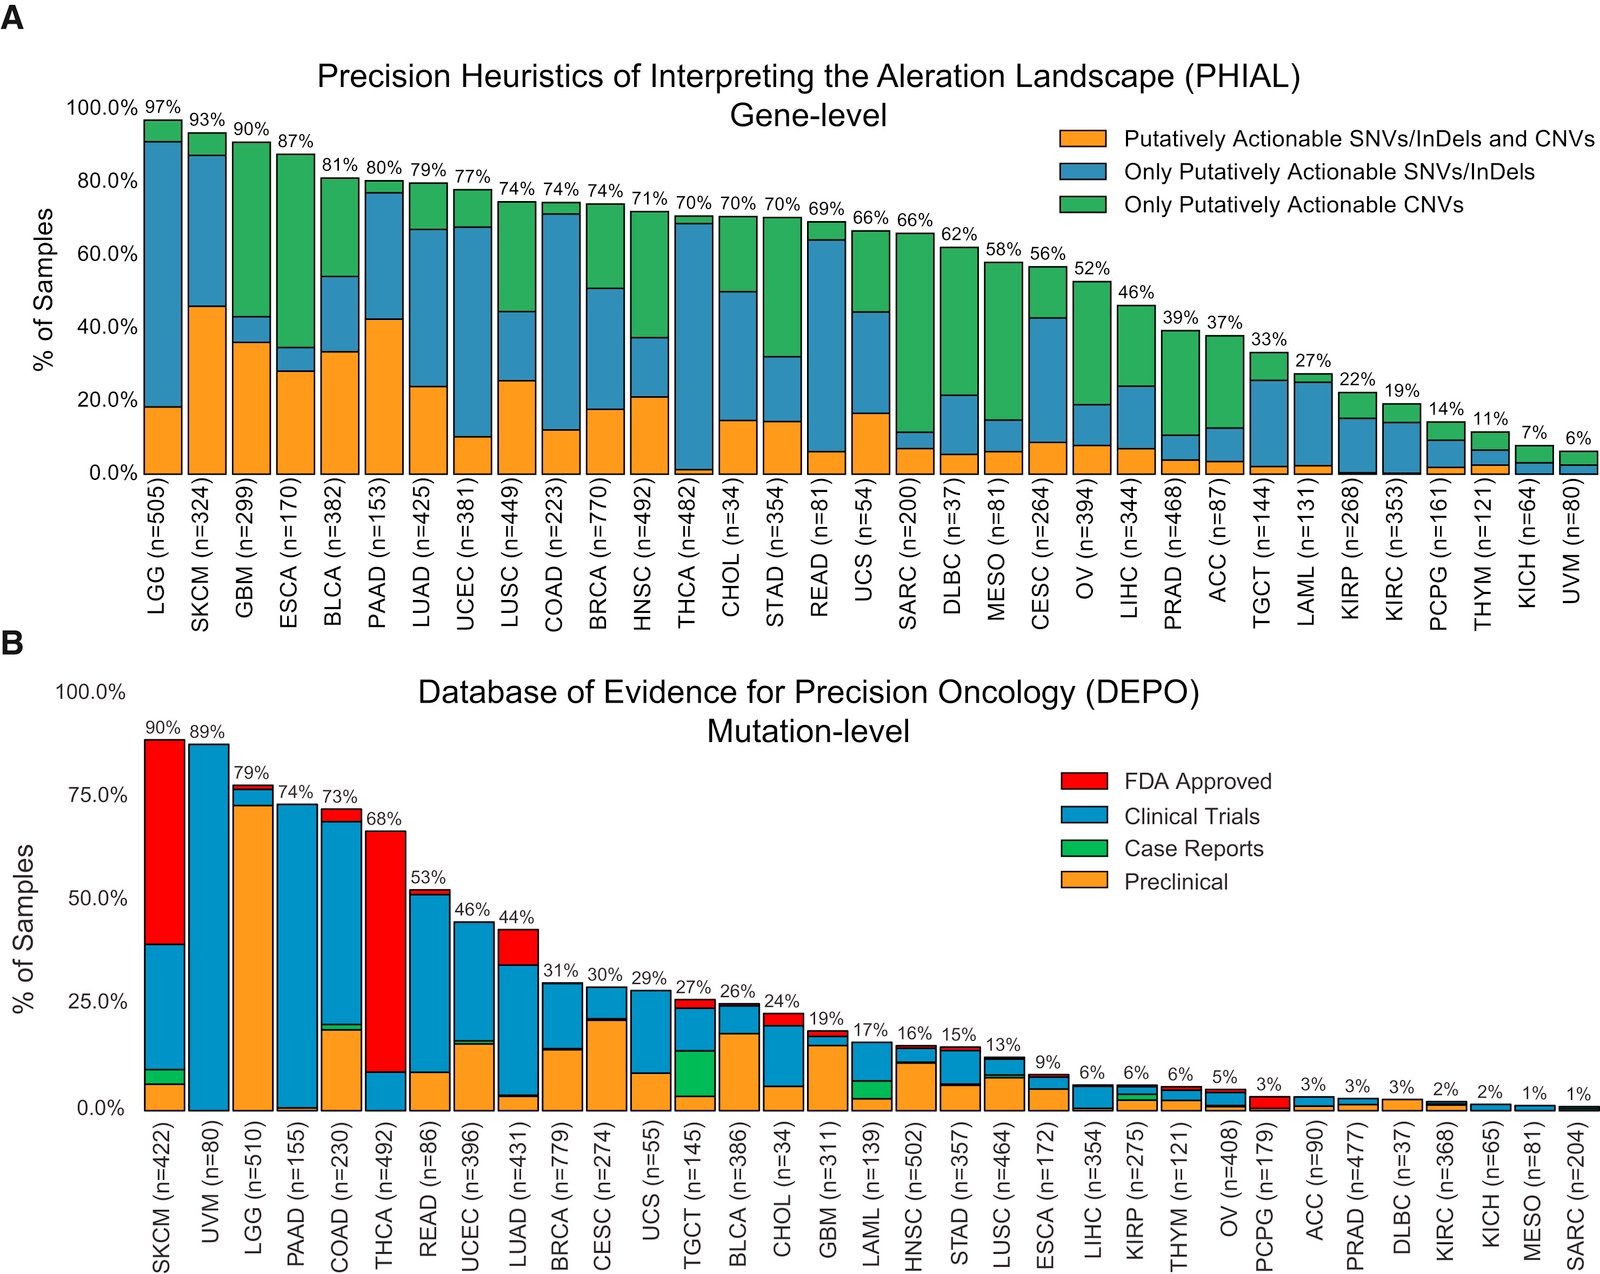  Cancer driver genes and mutations; Comprehensive Characterization of Cancer Driver Genes and Mutations